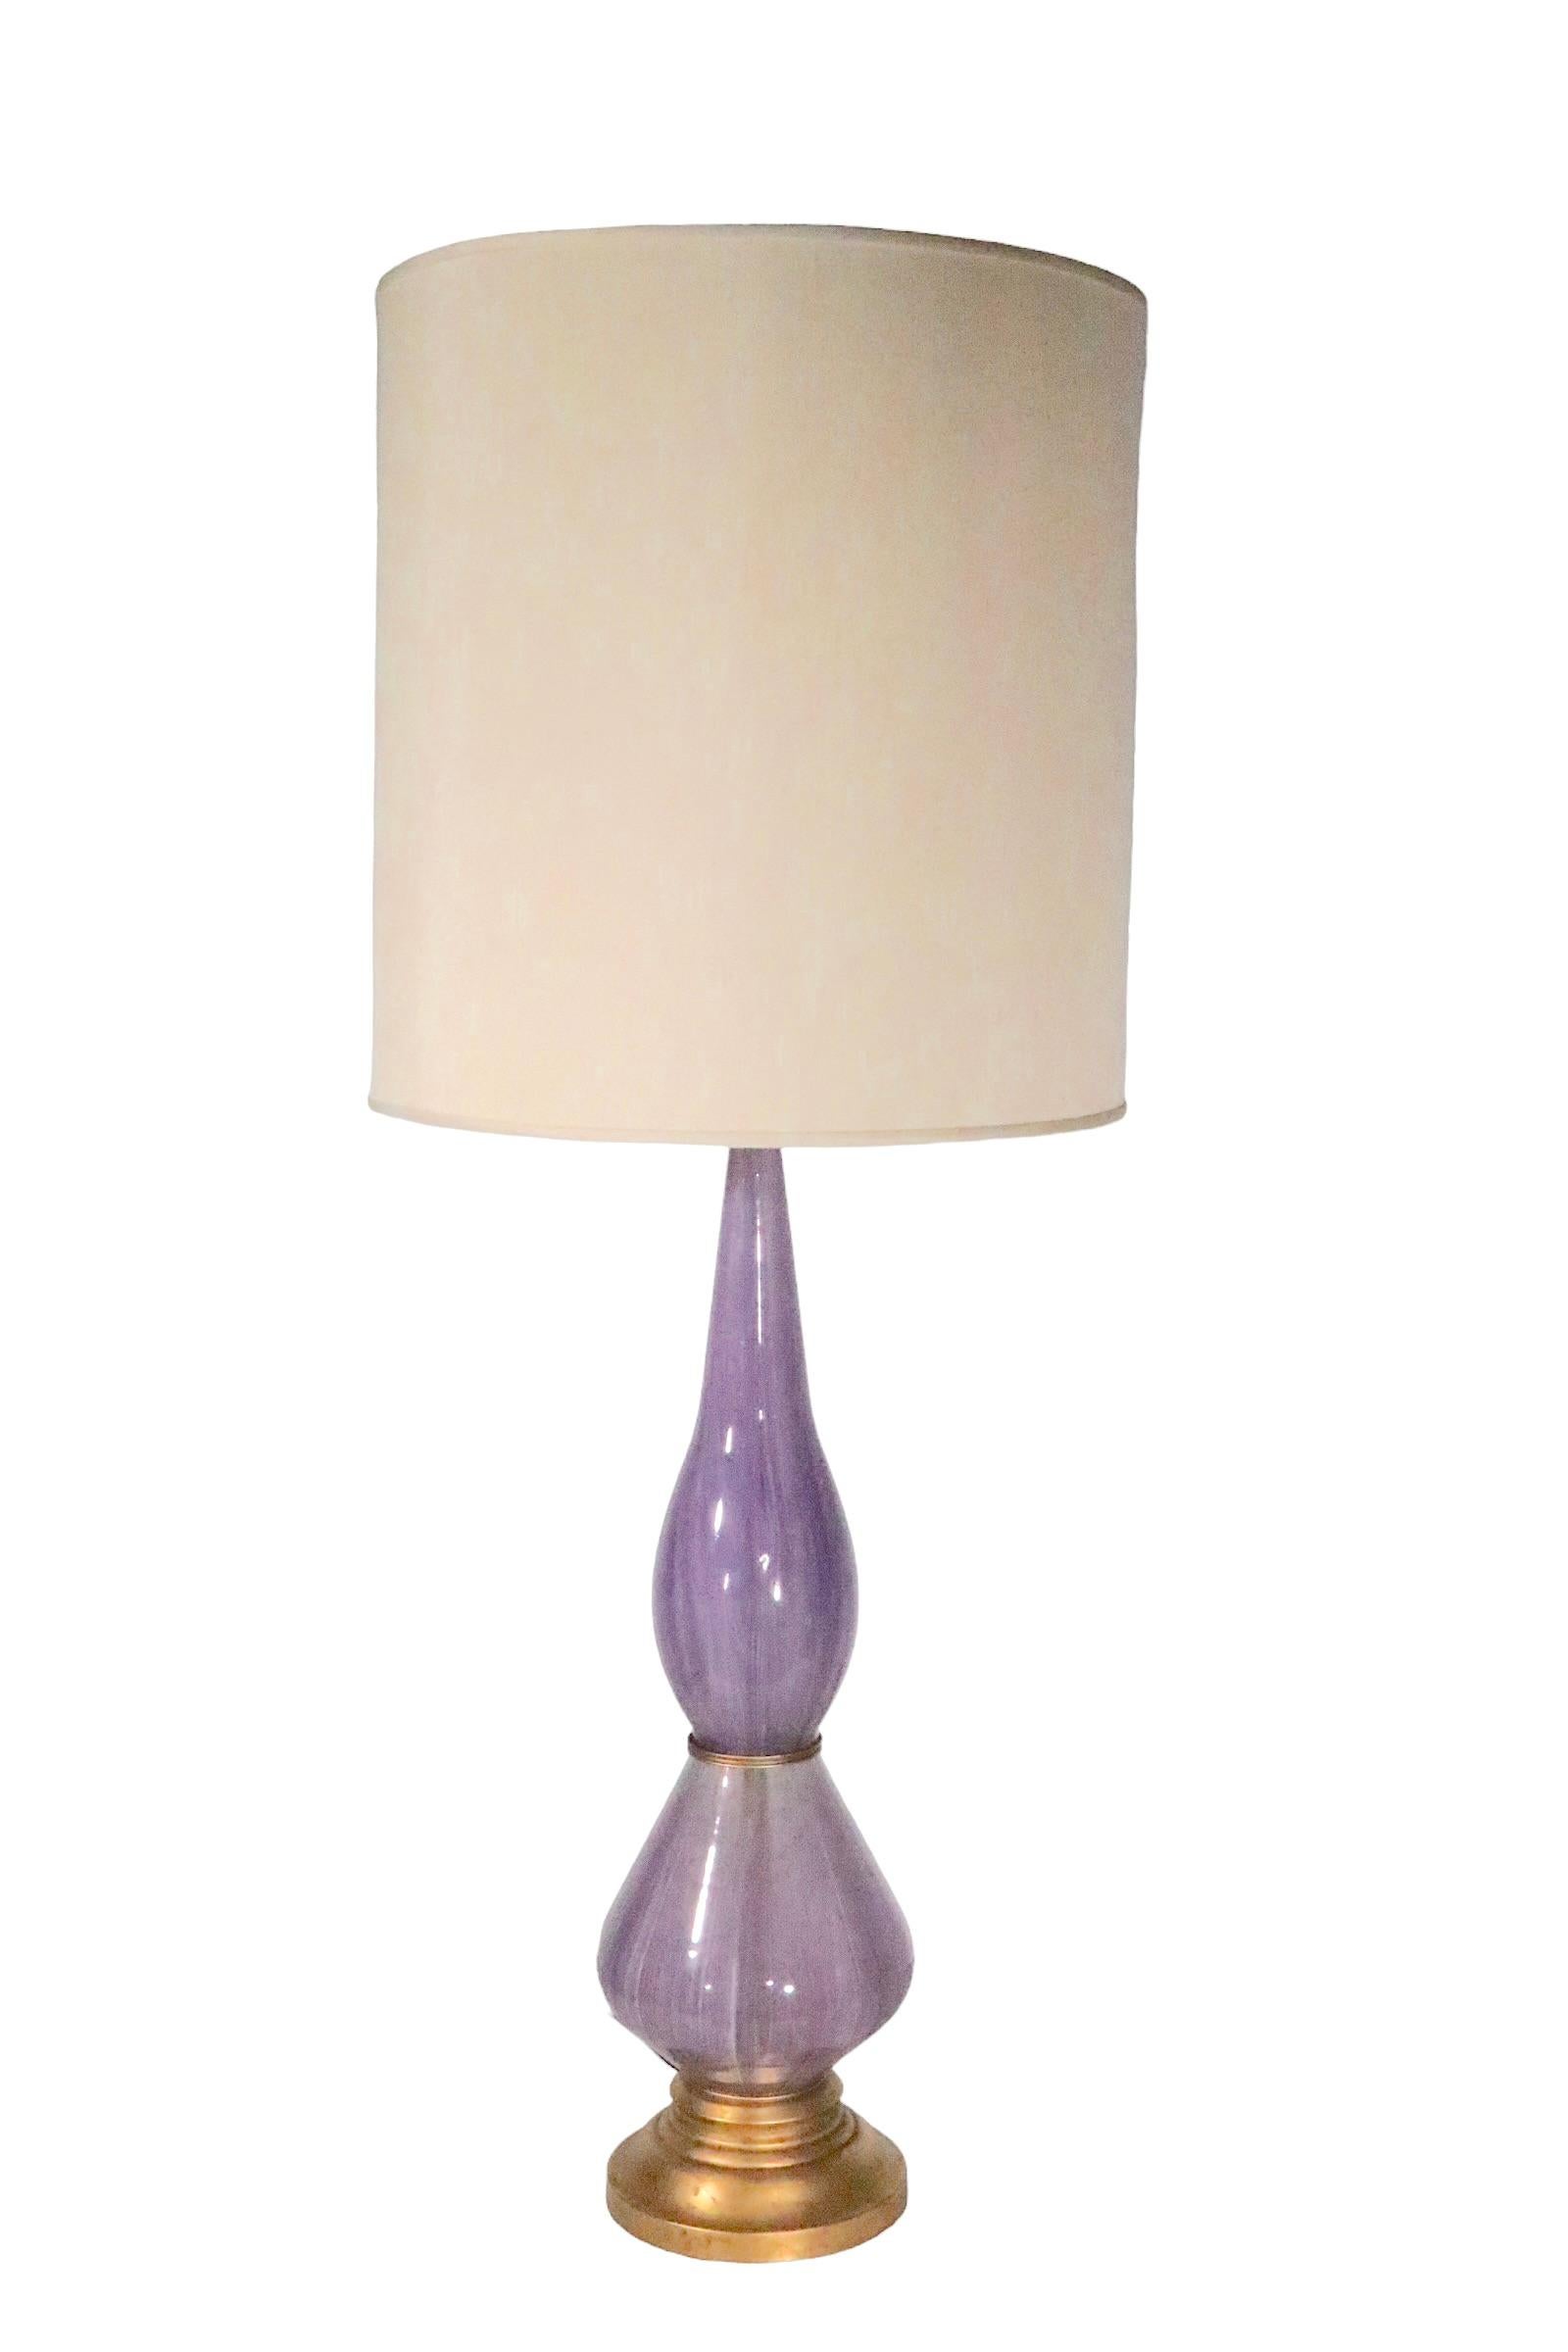 20th Century Large Murano Glass Table Lamp in Lavender Glass, circa 1950/1960s For Sale